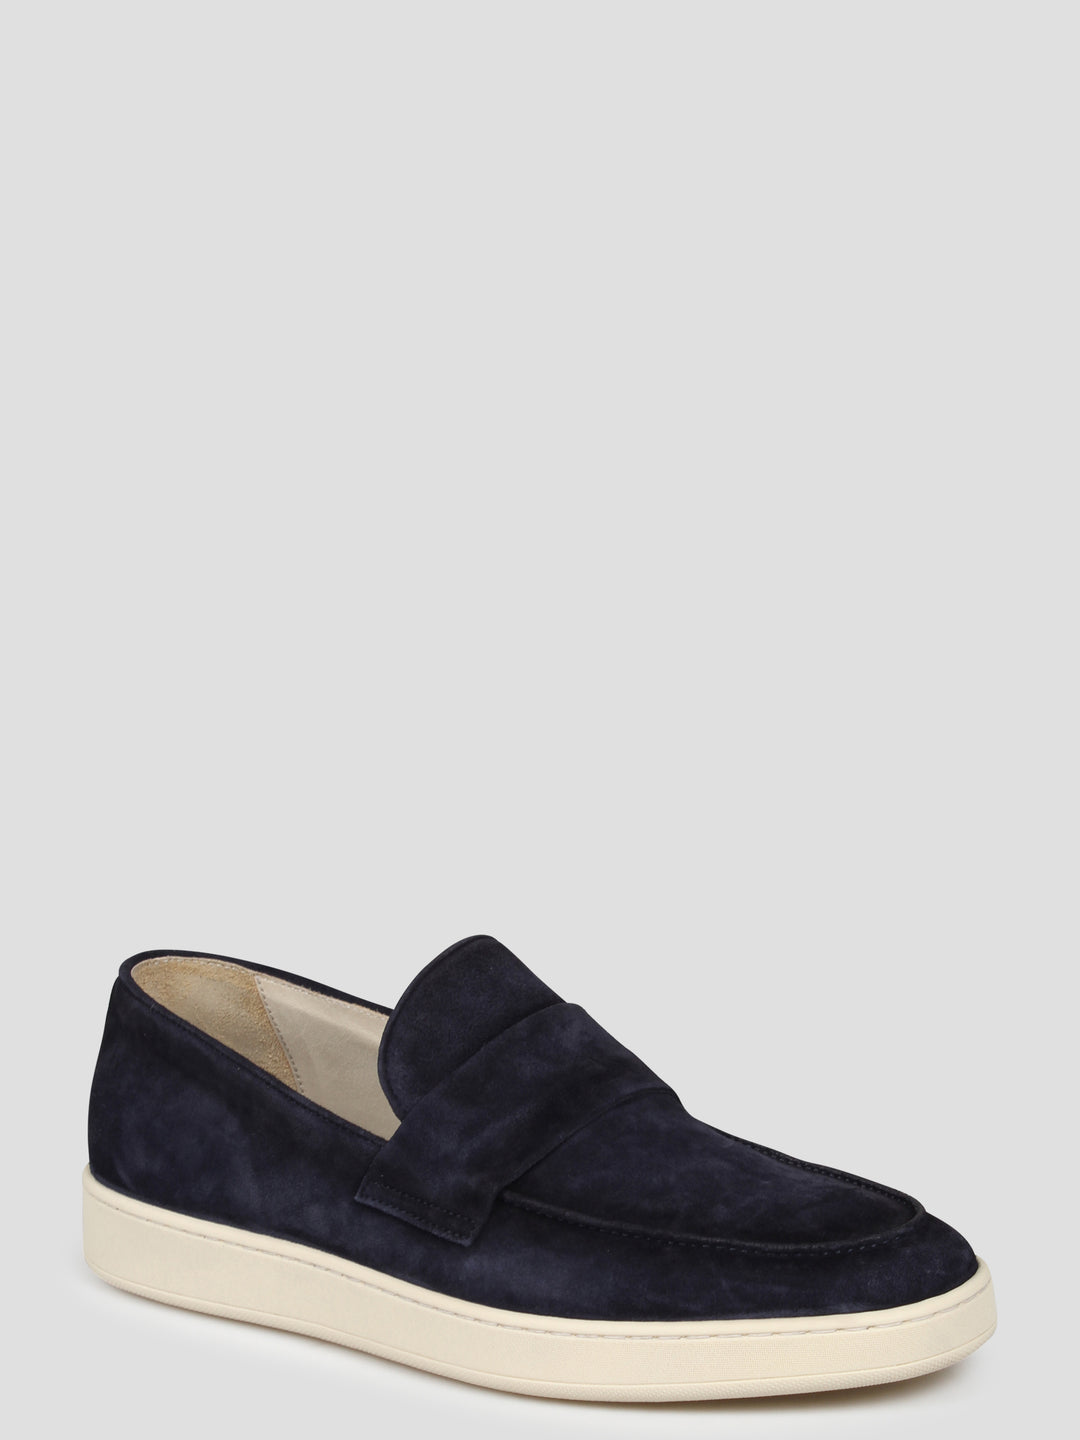 Boat penny loafers